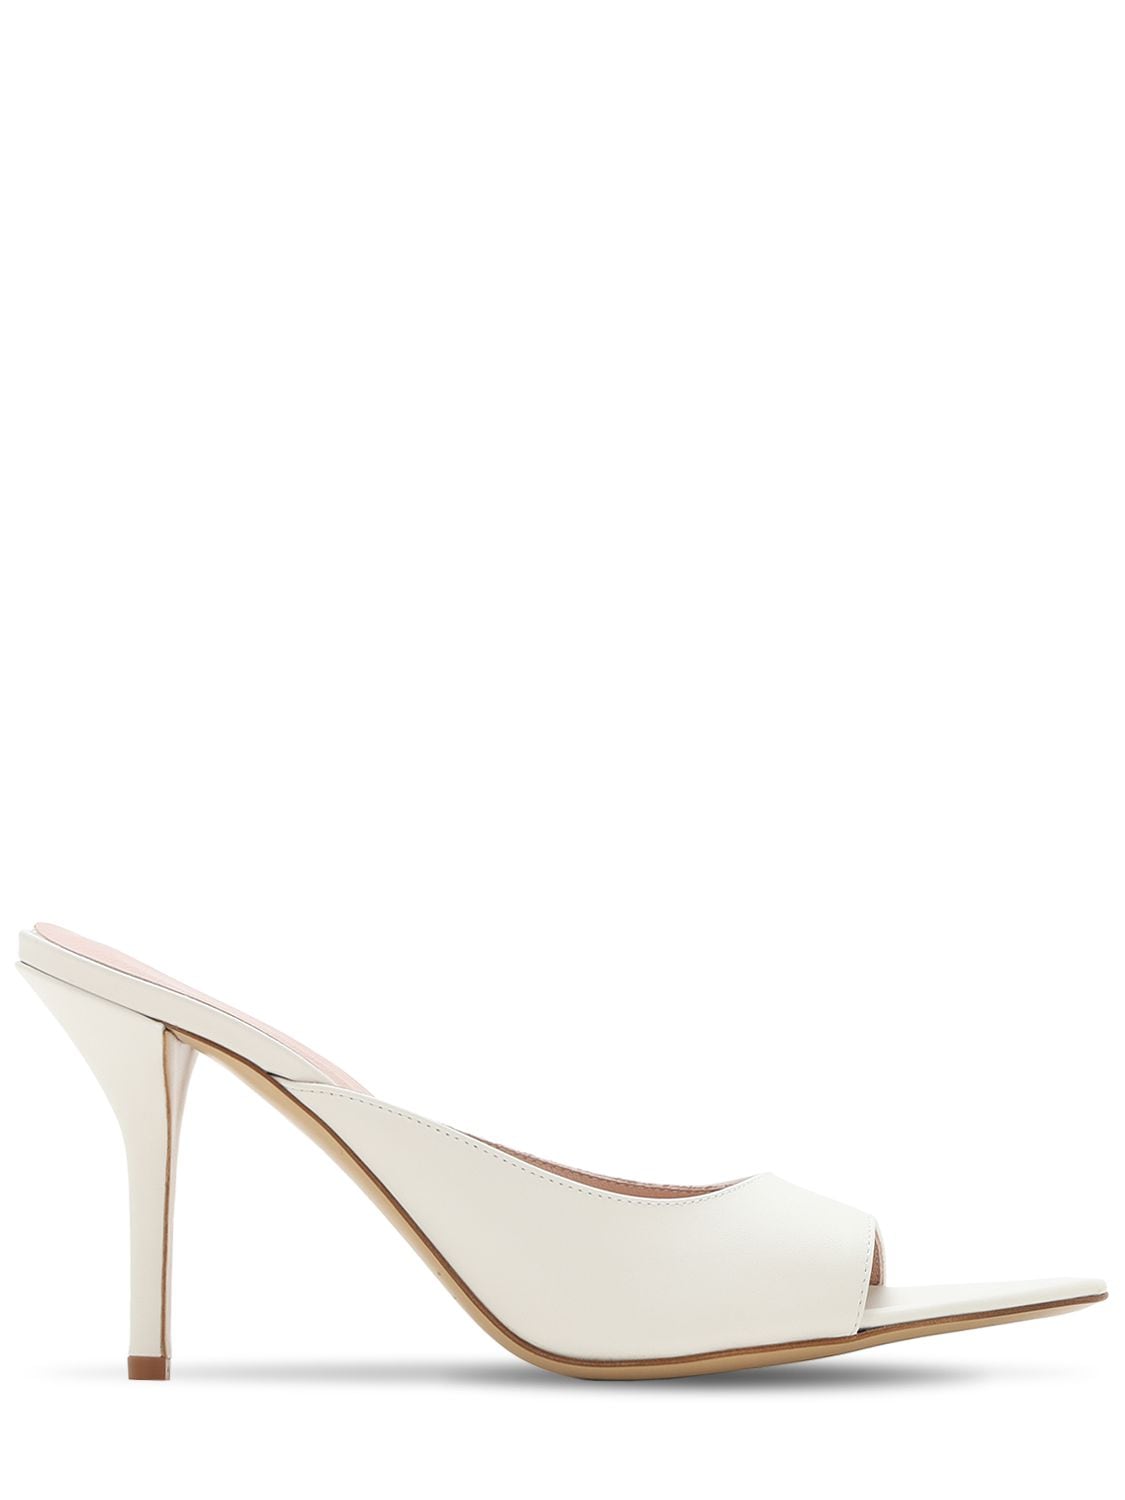 Gia X Pernille Teisbaek 85mm Pointed Toe Leather Mules In Off-white